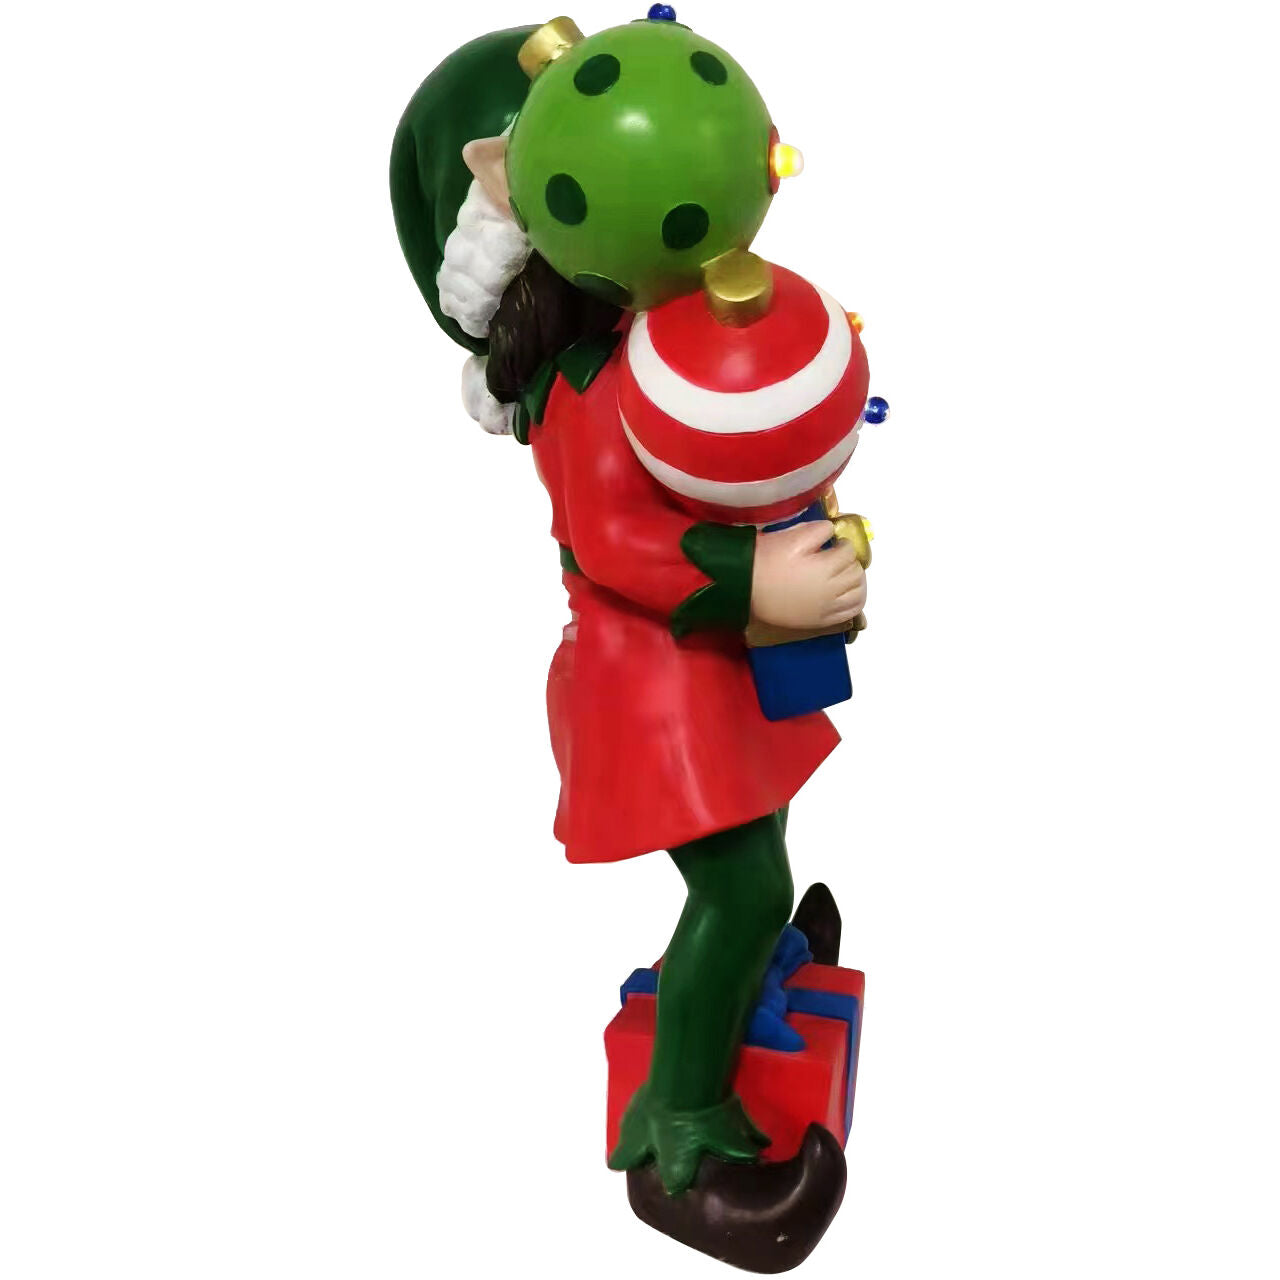 Fraser Hill Farm - 30-inch Elf Figurine Holding Presents with Built-in Multicolor LED Lights